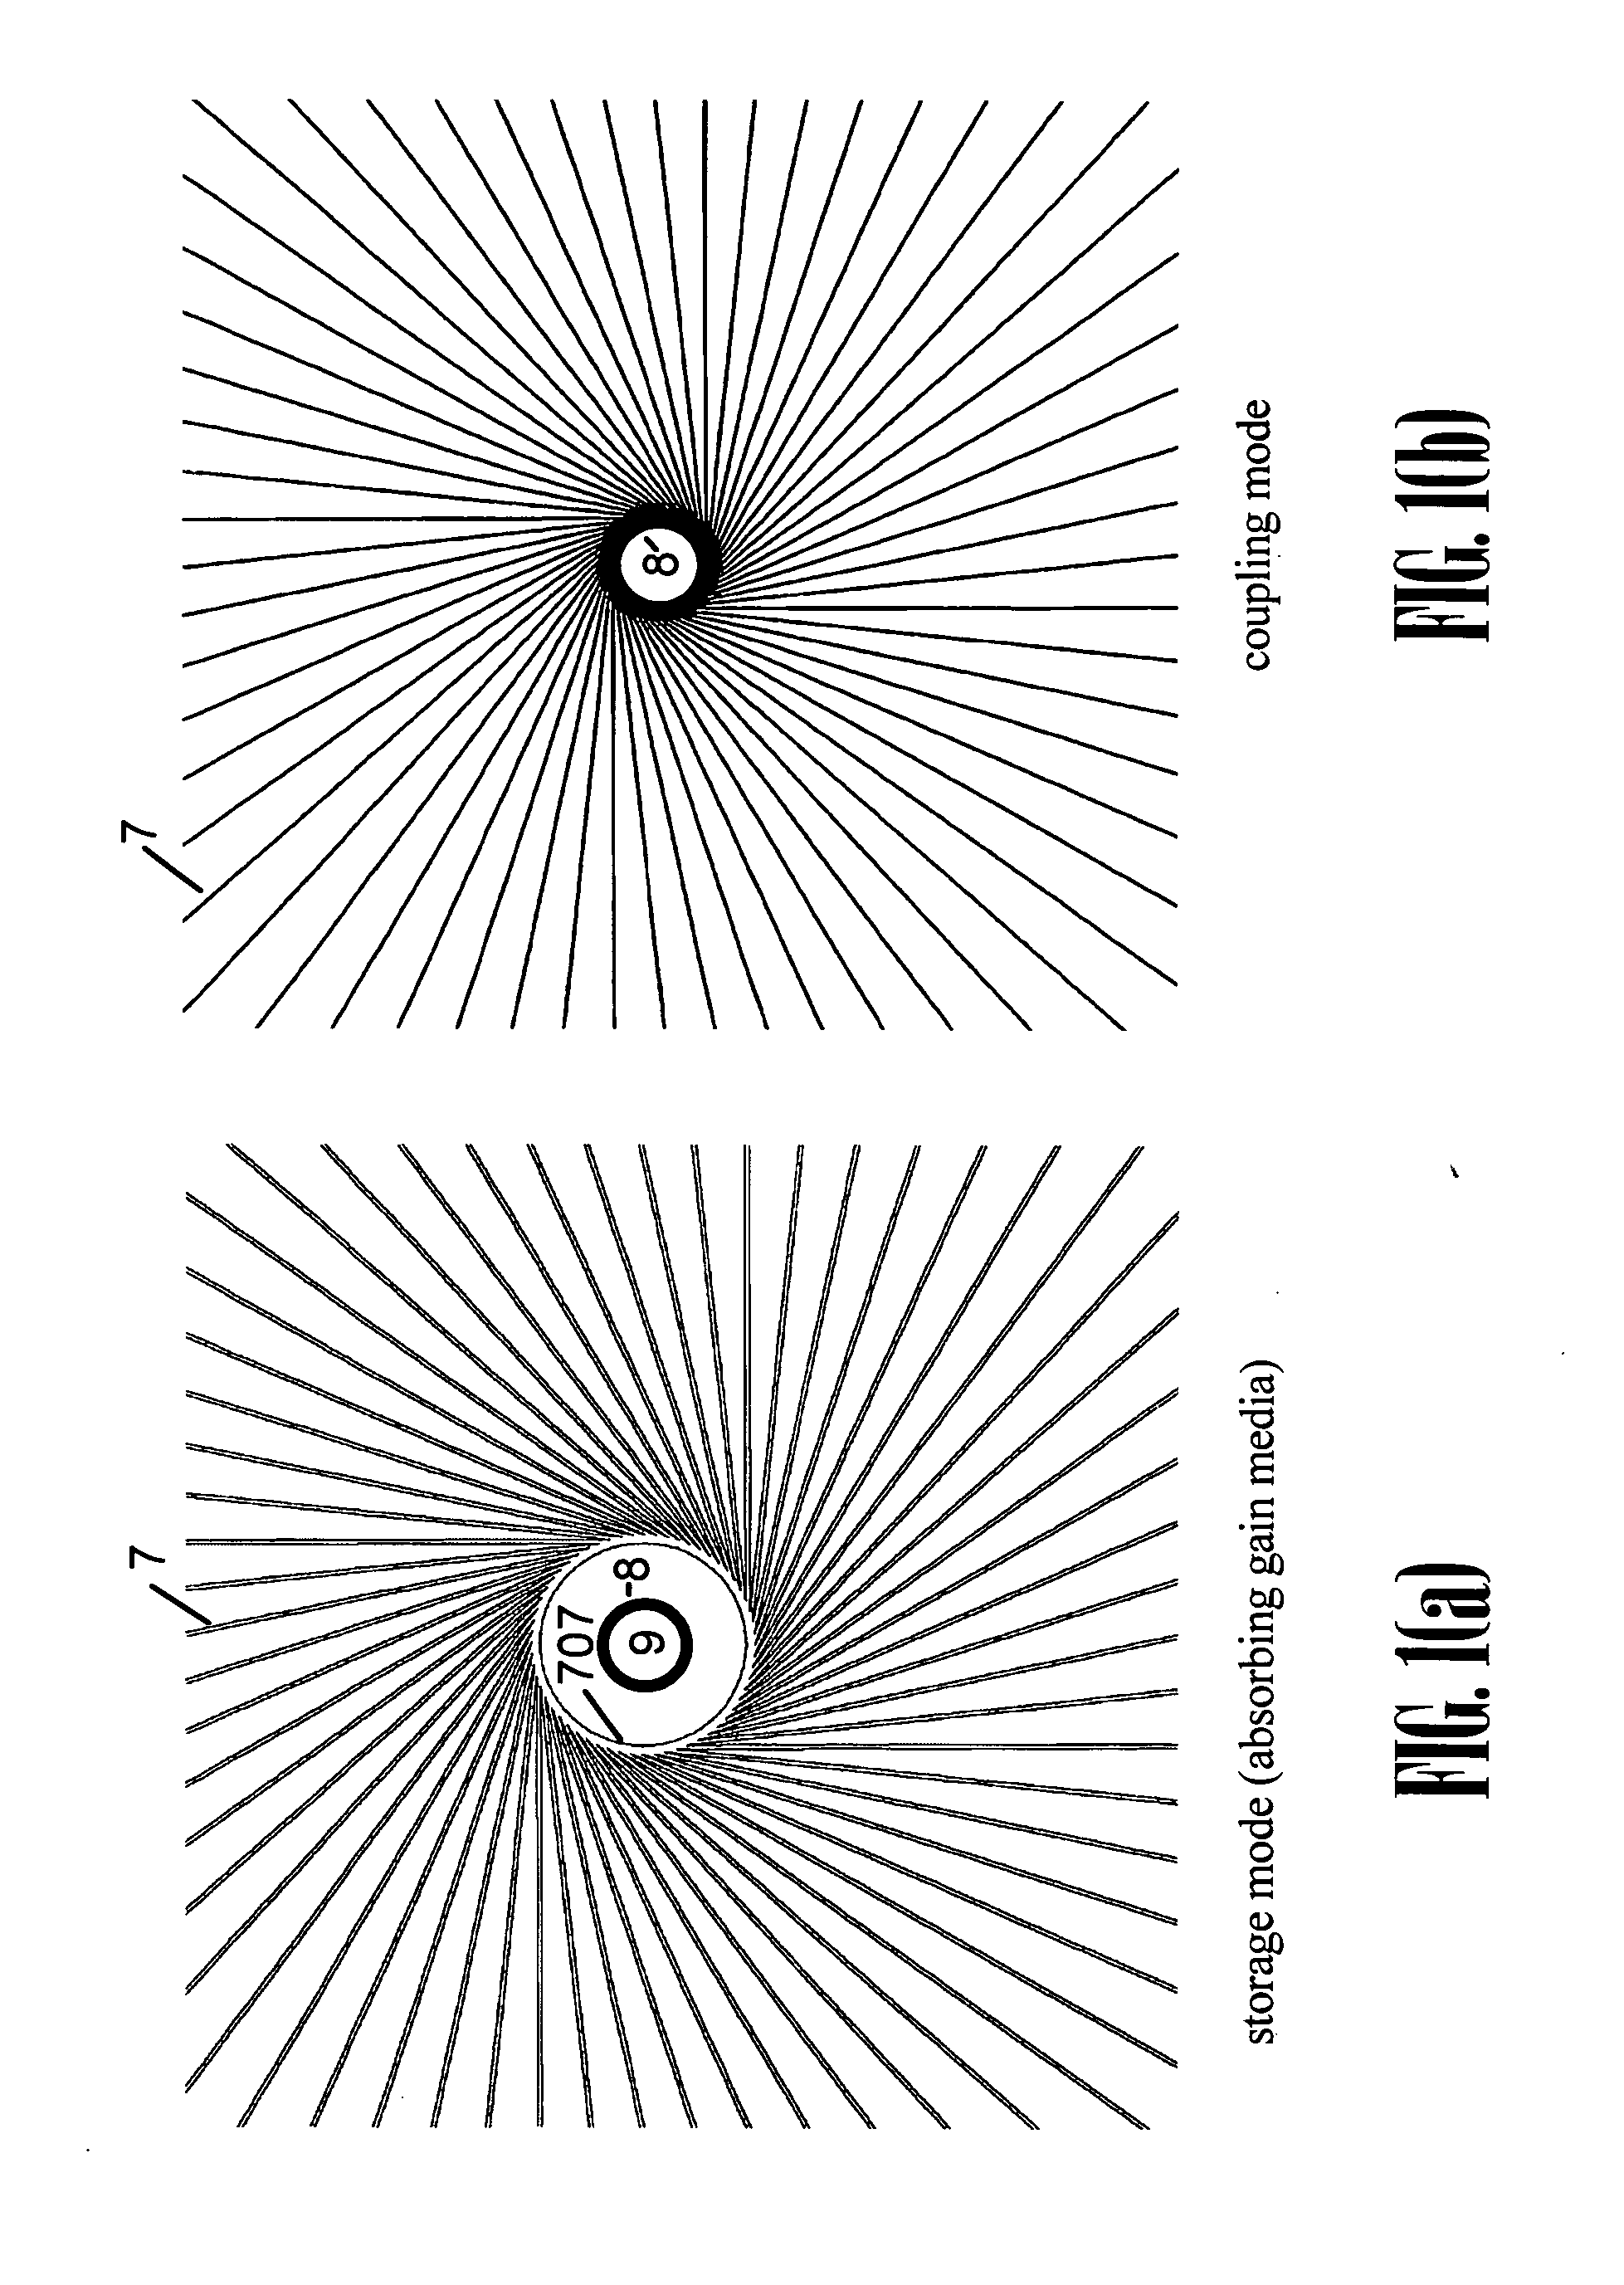 Synchronous pumping of a wagon wheel optical cavity